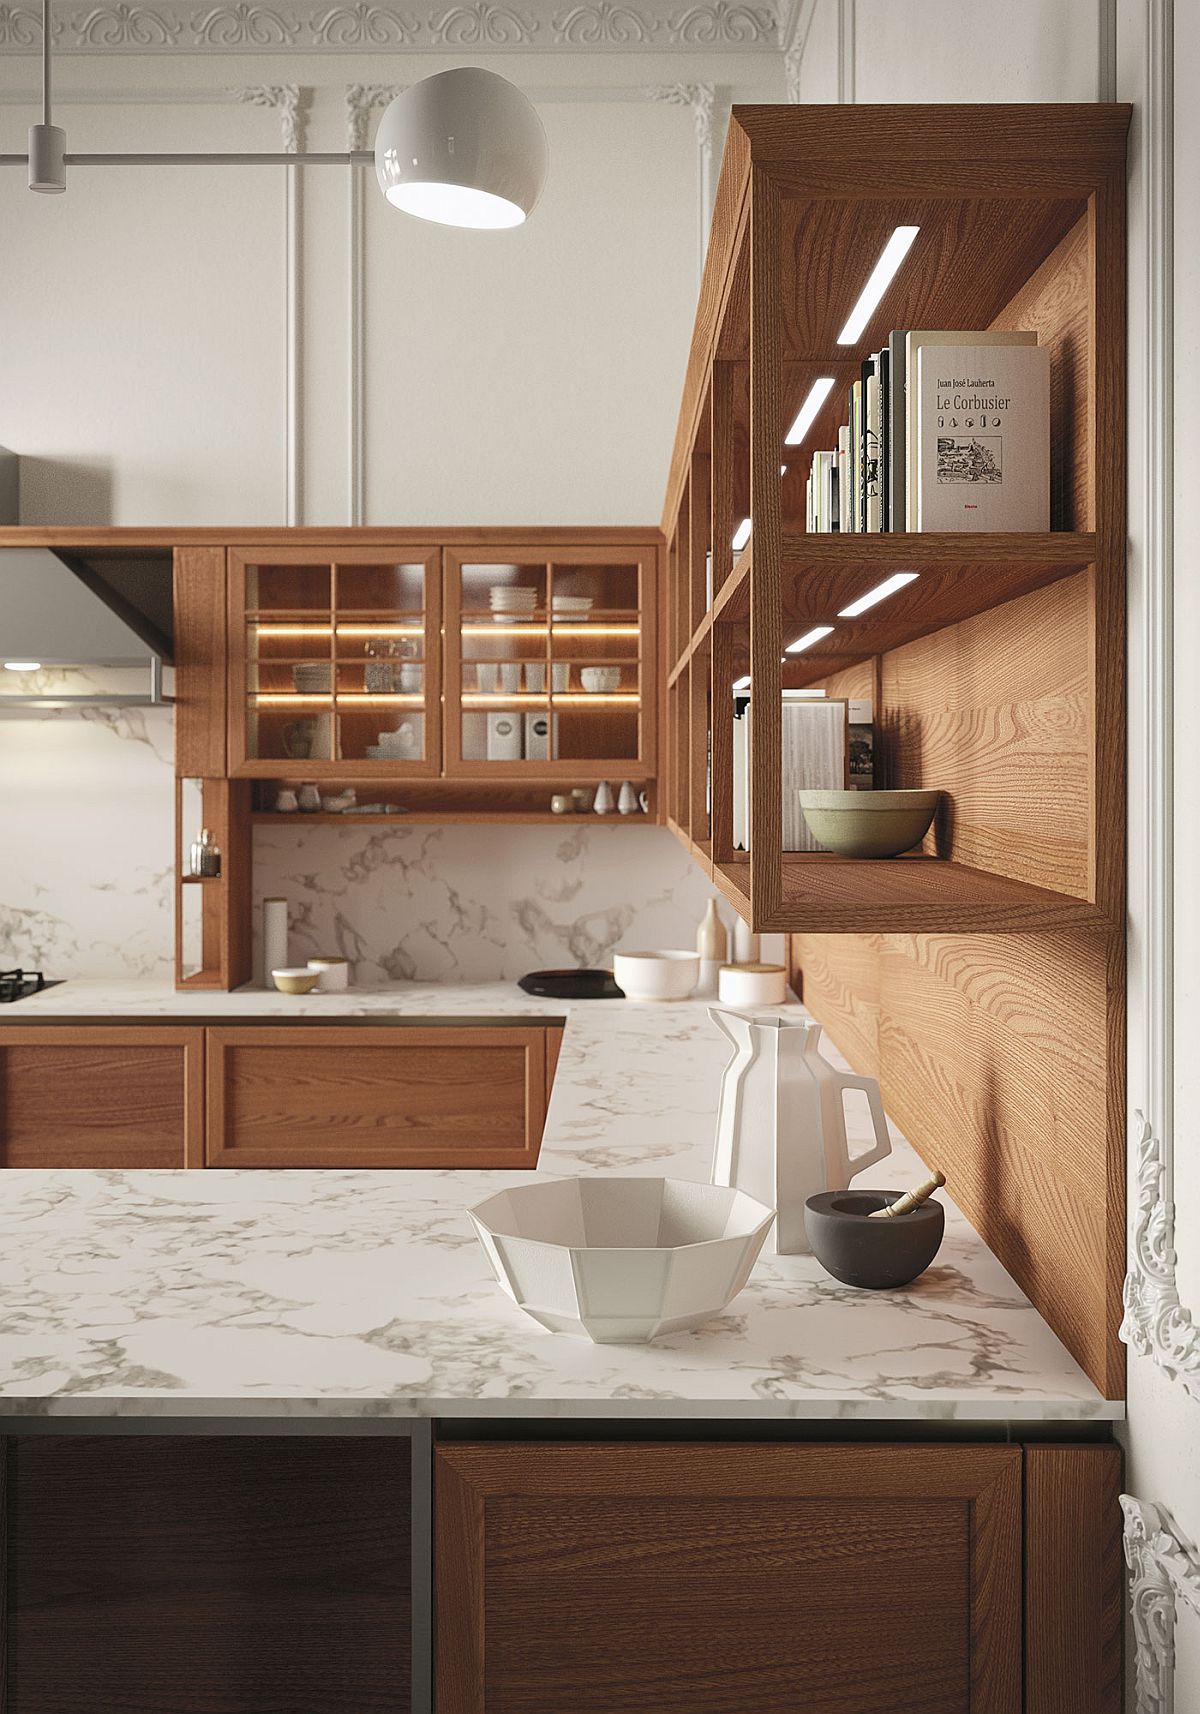 Open top units of the kitchen in wood along with marble countertops